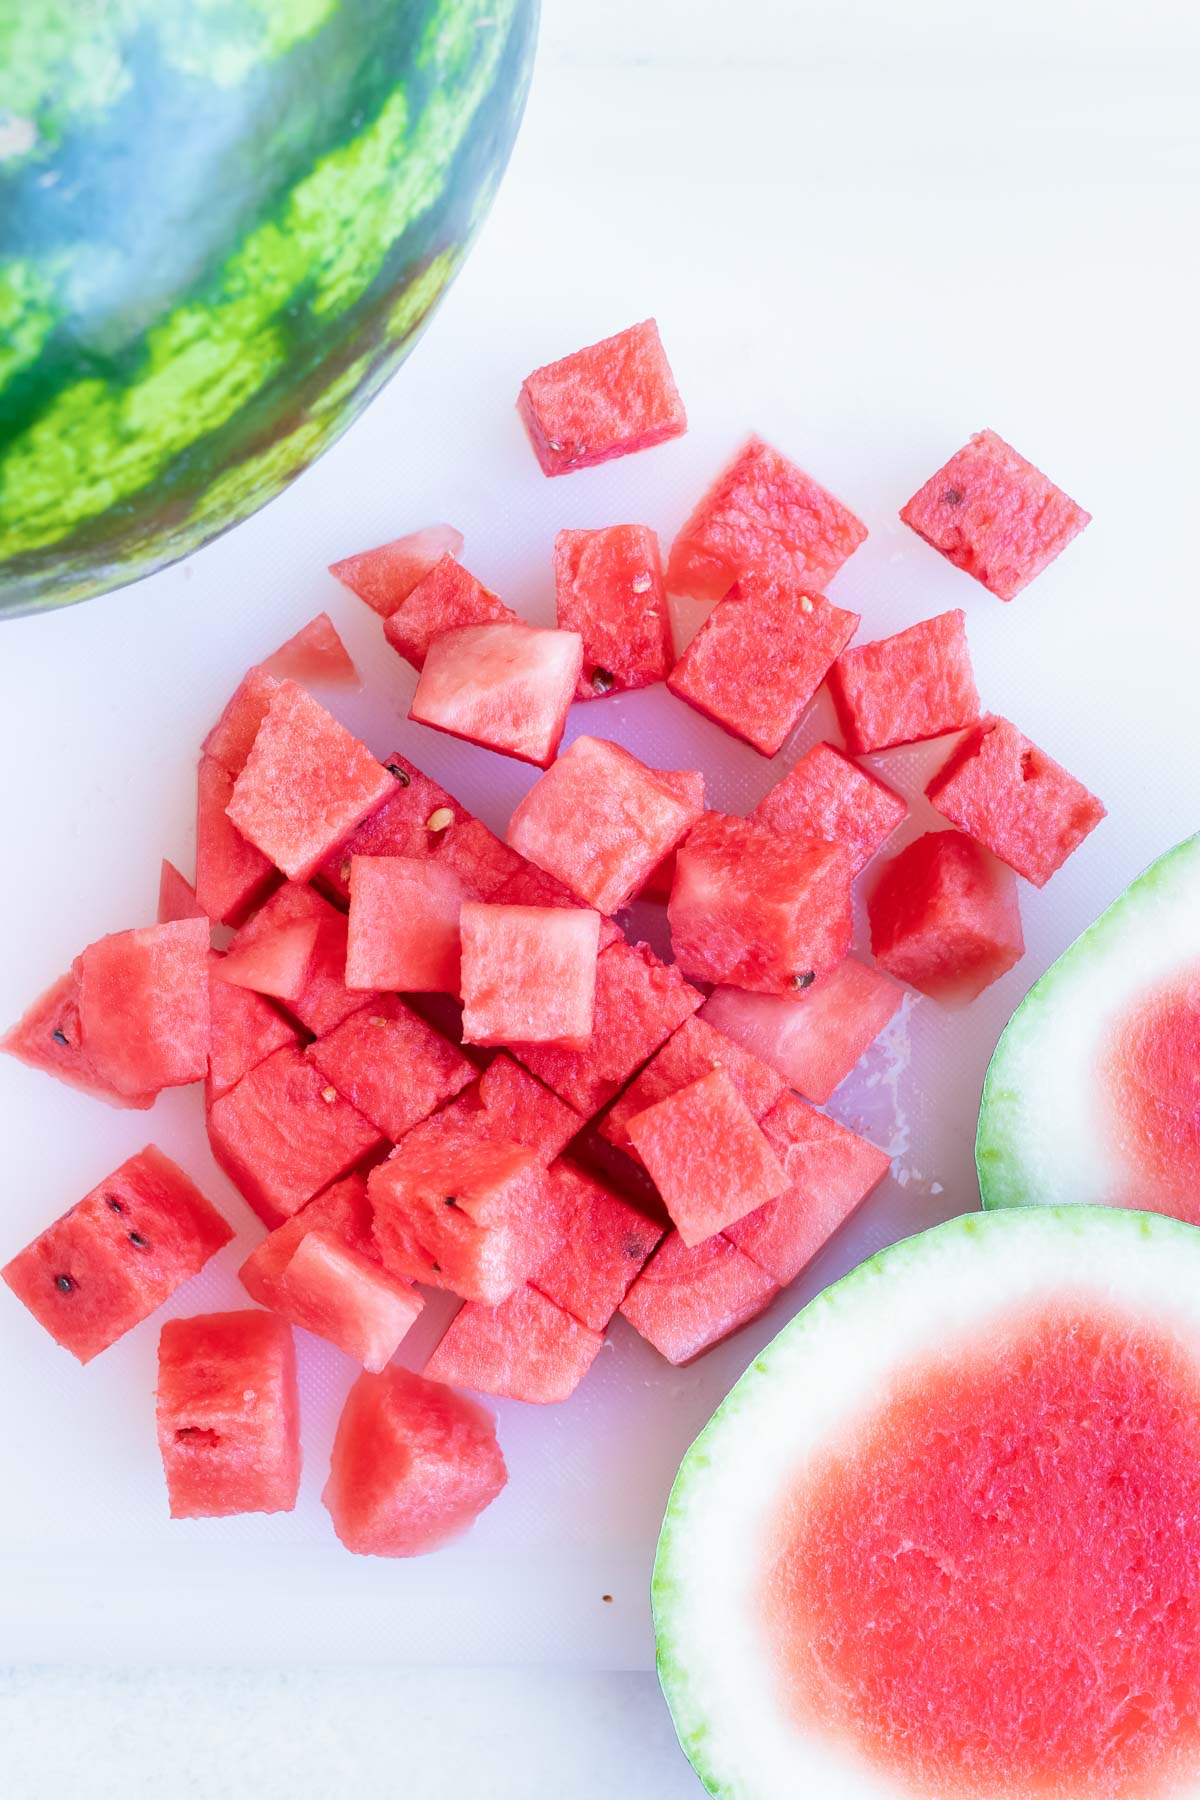 Cubed watermelon on a white cutting board.